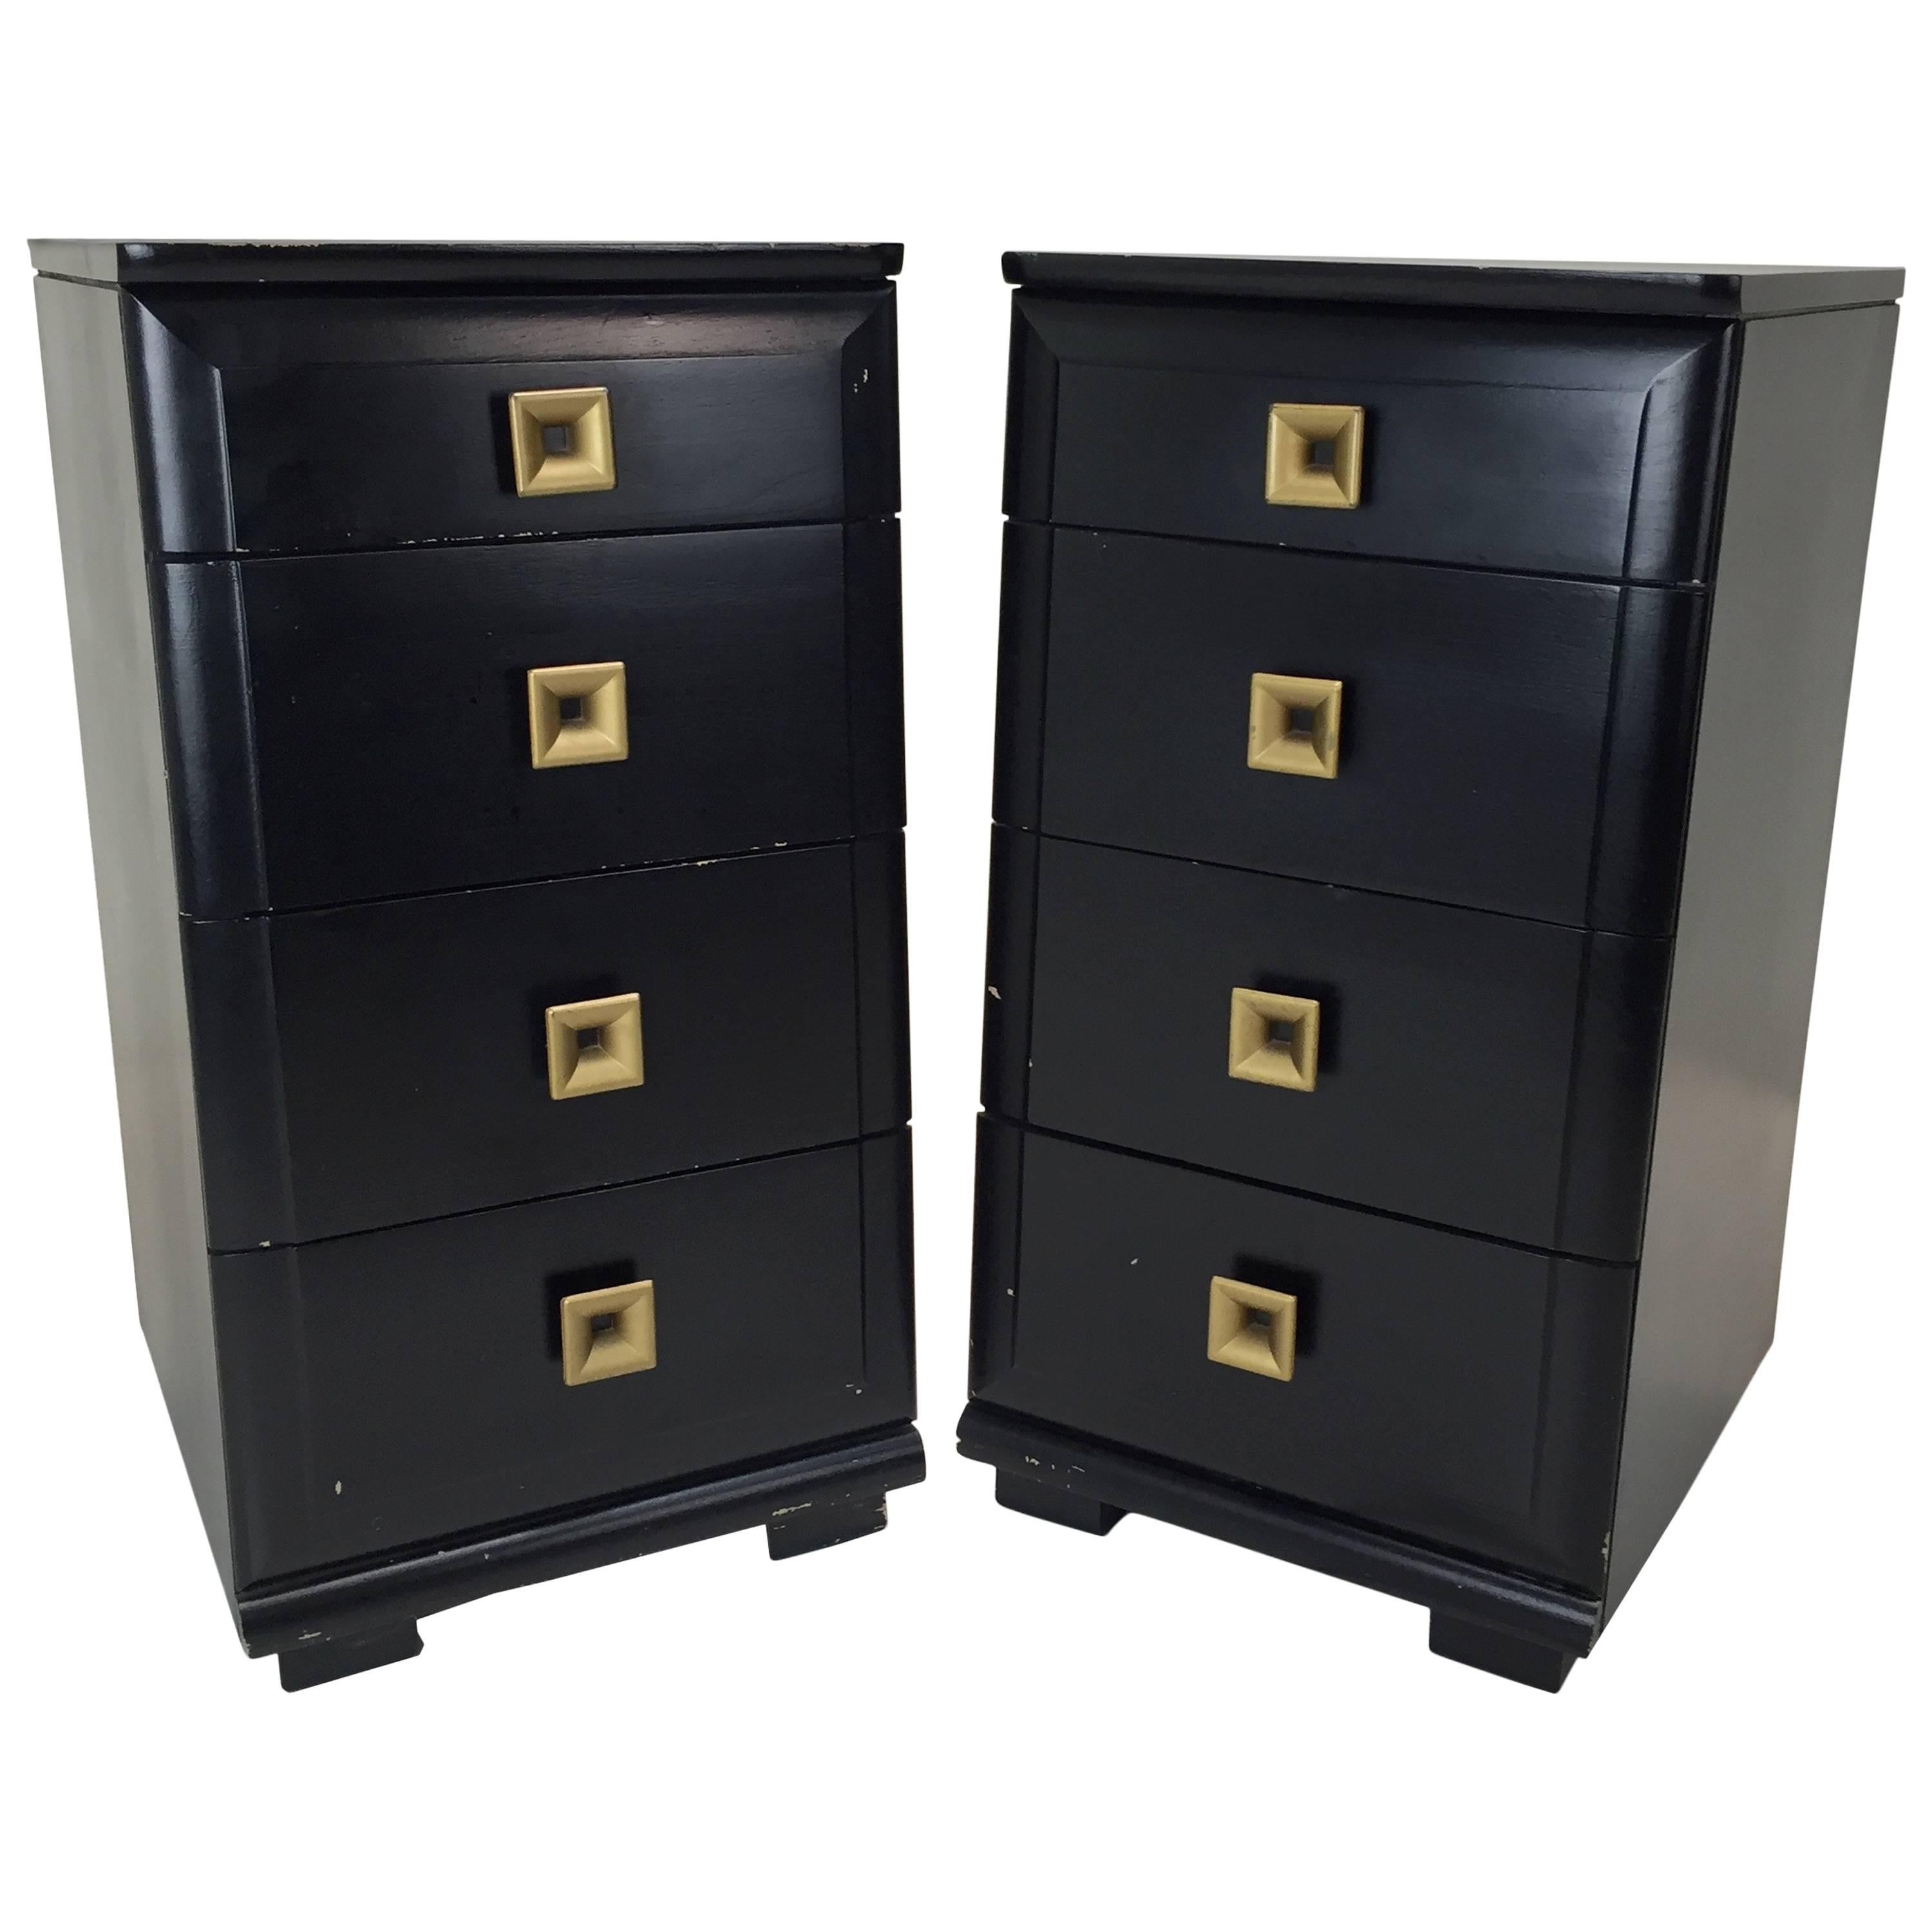 Pair of Nightstands in the style of Raymond Loewy for Mengel with Great Storage